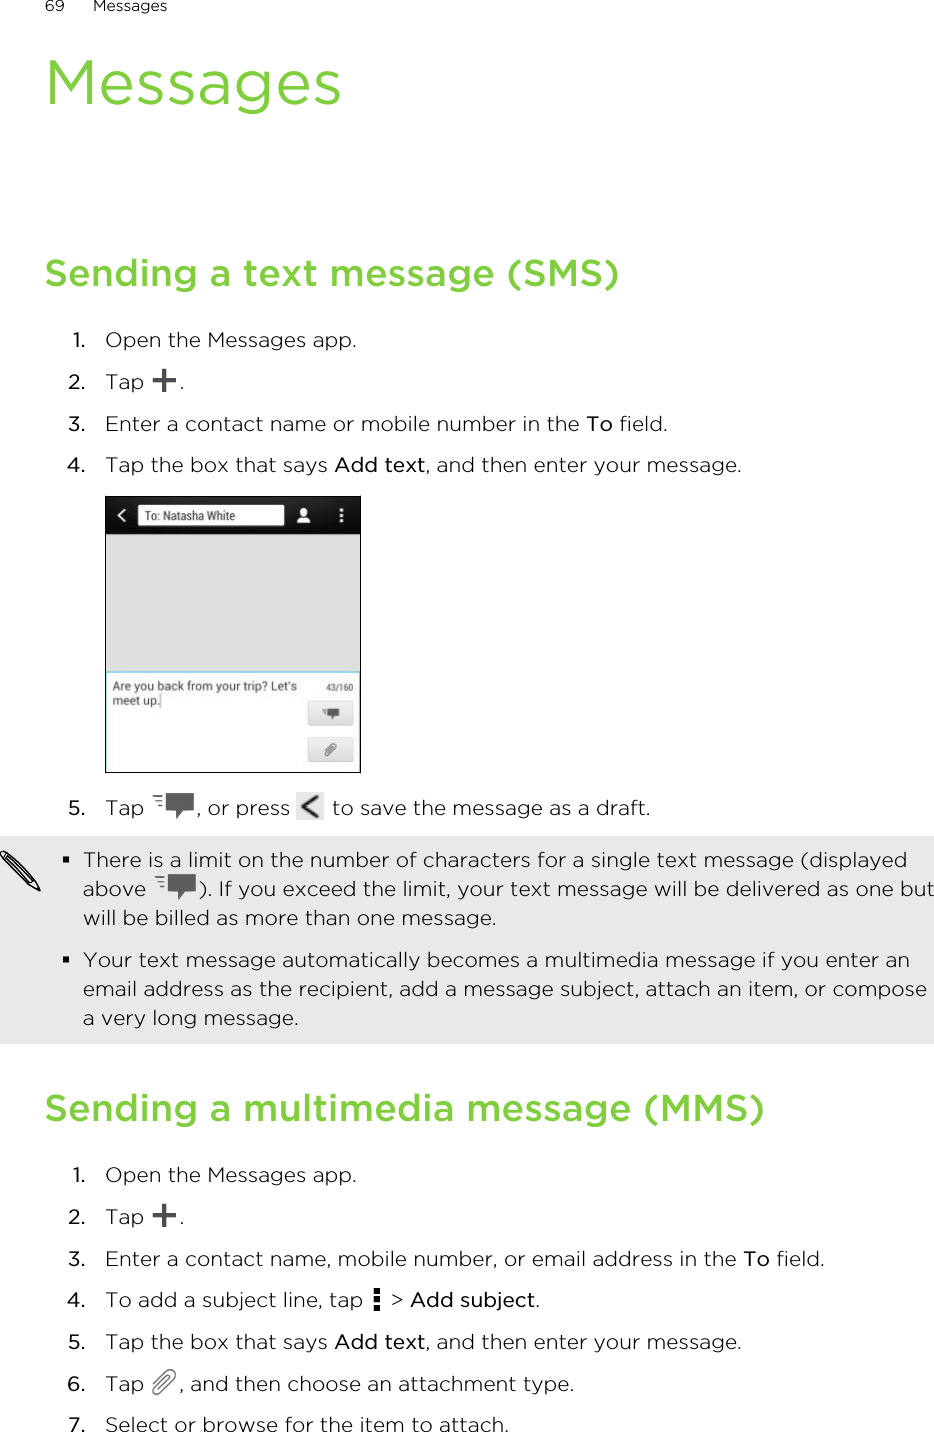 MessagesSending a text message (SMS)1. Open the Messages app.2. Tap  .3. Enter a contact name or mobile number in the To field.4. Tap the box that says Add text, and then enter your message. 5. Tap  , or press   to save the message as a draft. §There is a limit on the number of characters for a single text message (displayedabove  ). If you exceed the limit, your text message will be delivered as one butwill be billed as more than one message.§Your text message automatically becomes a multimedia message if you enter anemail address as the recipient, add a message subject, attach an item, or composea very long message.Sending a multimedia message (MMS)1. Open the Messages app.2. Tap  .3. Enter a contact name, mobile number, or email address in the To field.4. To add a subject line, tap   &gt; Add subject.5. Tap the box that says Add text, and then enter your message.6. Tap  , and then choose an attachment type.7. Select or browse for the item to attach.69 Messages